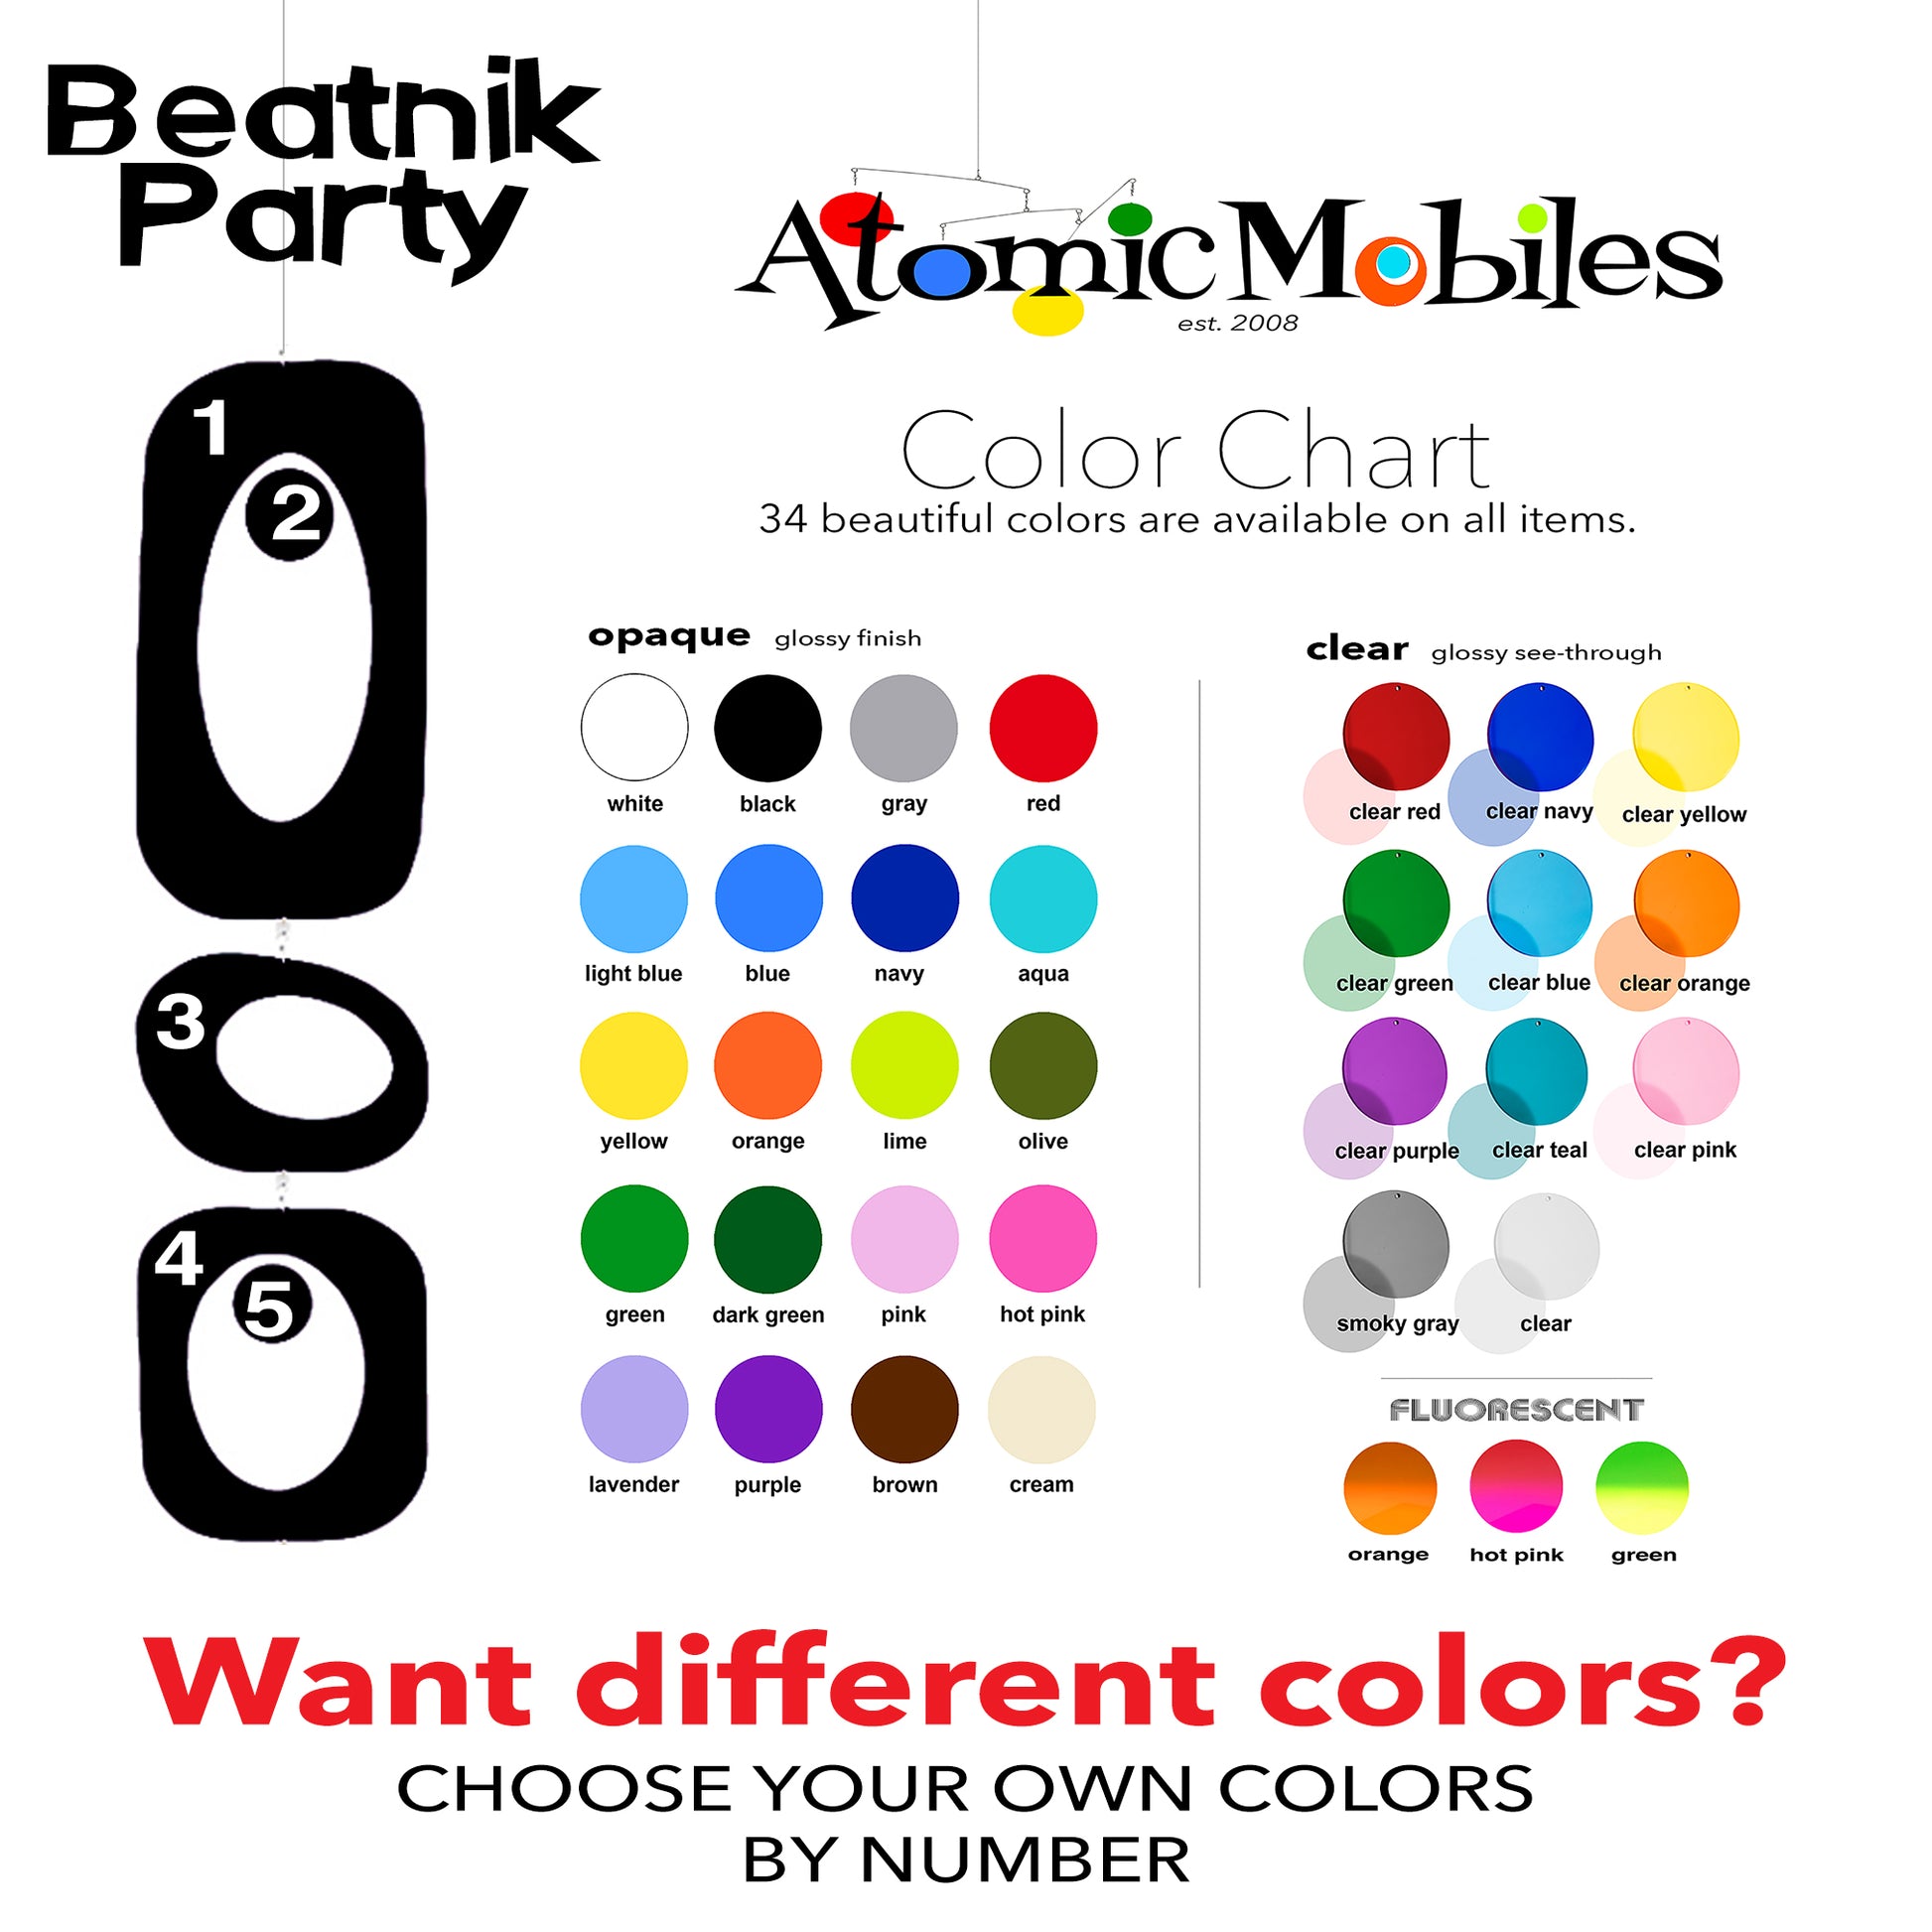 Color Chart for Holiday Christmas Decorations in Custom Alternative Christmas Colors by AtomicMobiles.com